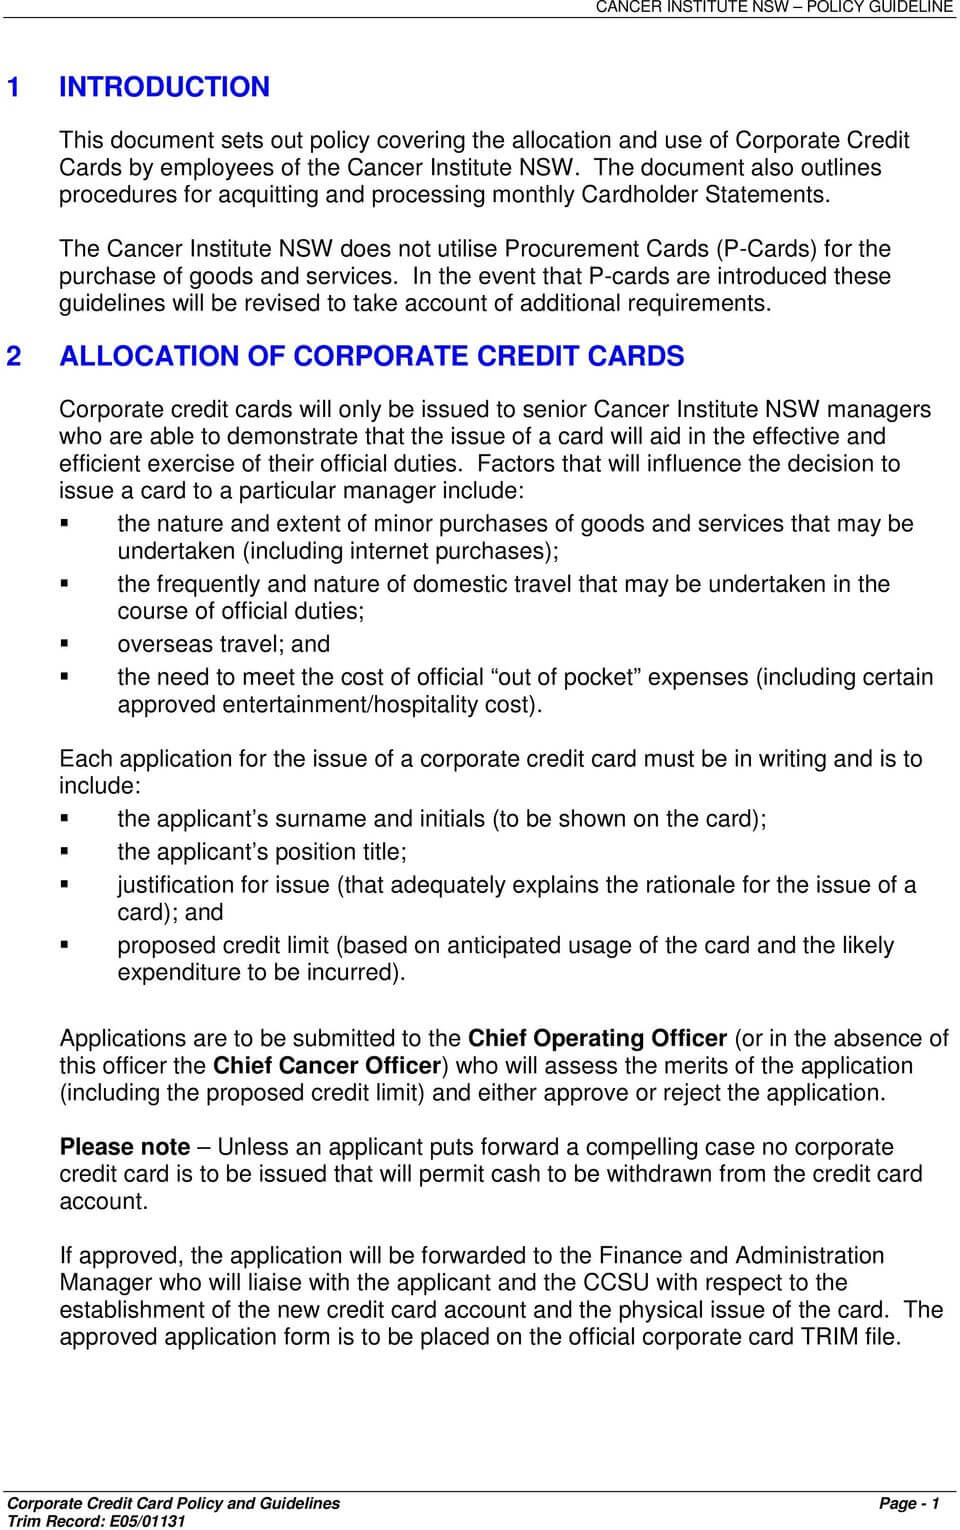 Corporate Credit Card Policy Template ] – Procurement Cards Throughout Company Credit Card Policy Template